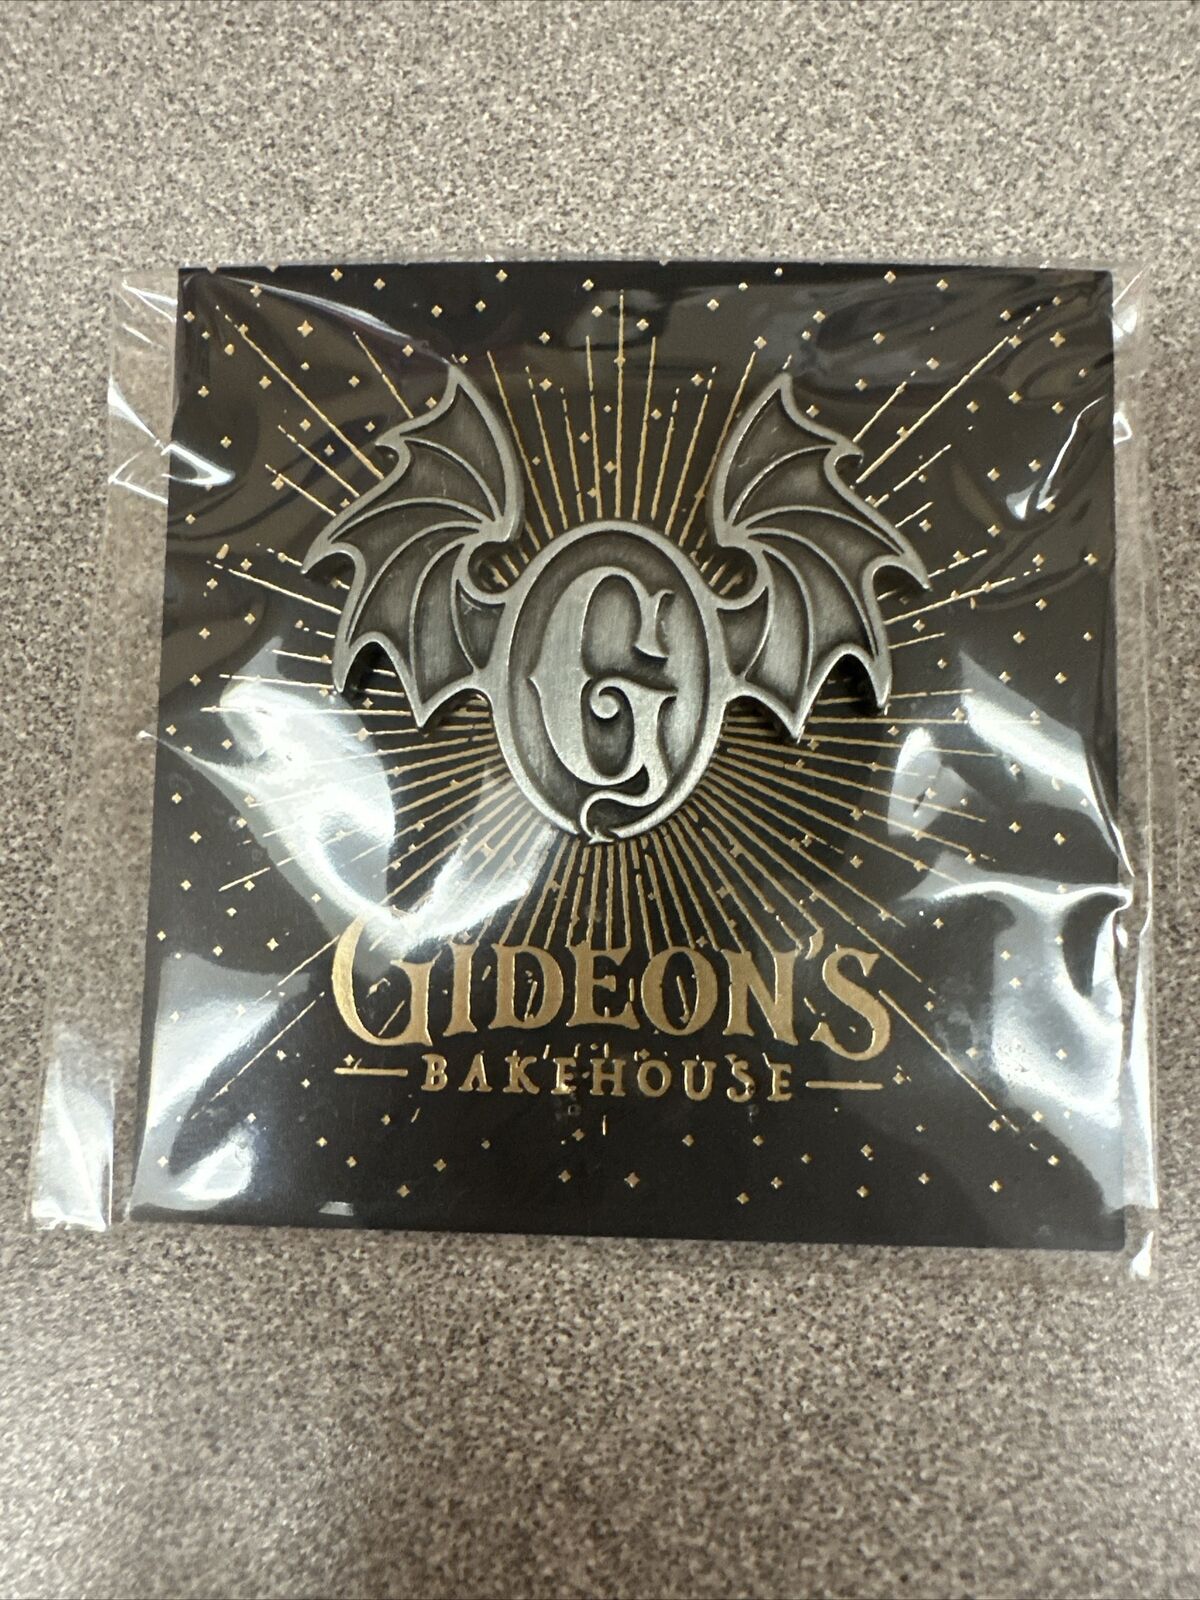 NEW/SEALED - Gideons Bakehouse Original Winged ‘G’ Pin - RETIRED - Unique